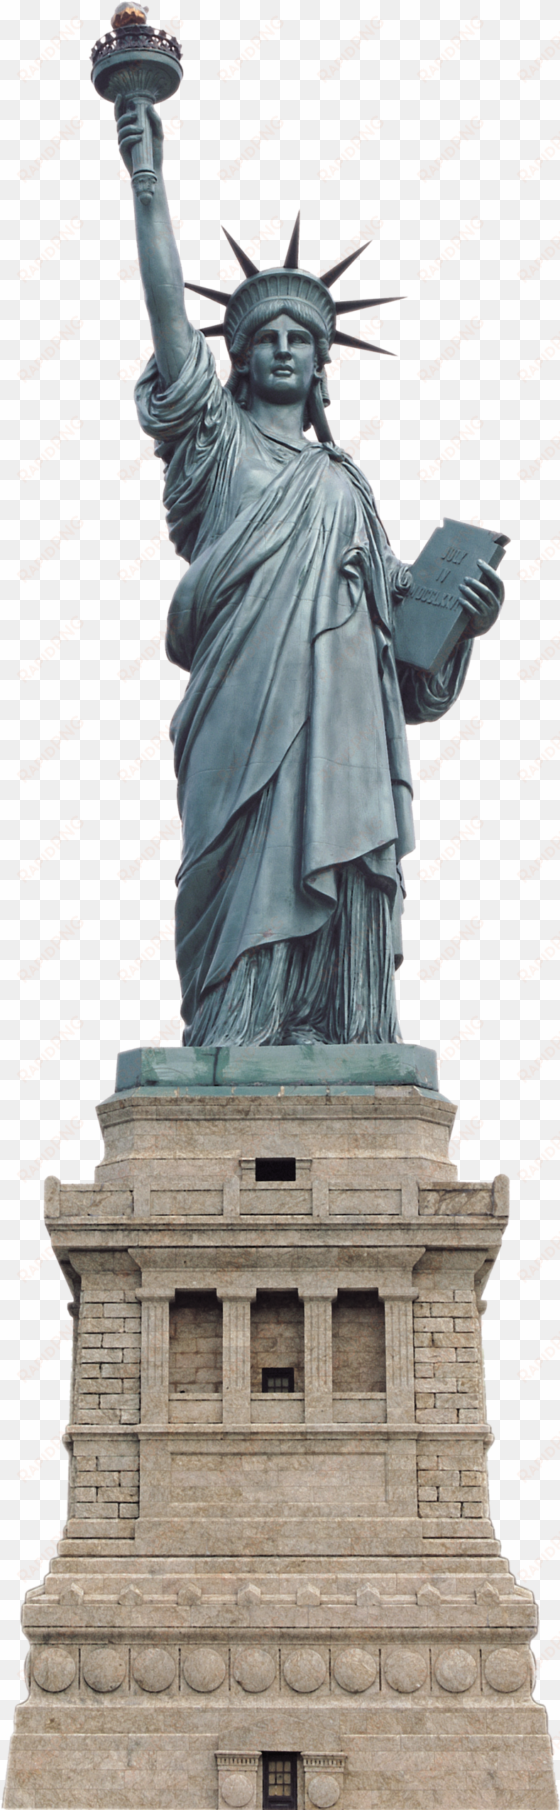 statue of liberty free download png - statue of liberty transparent background